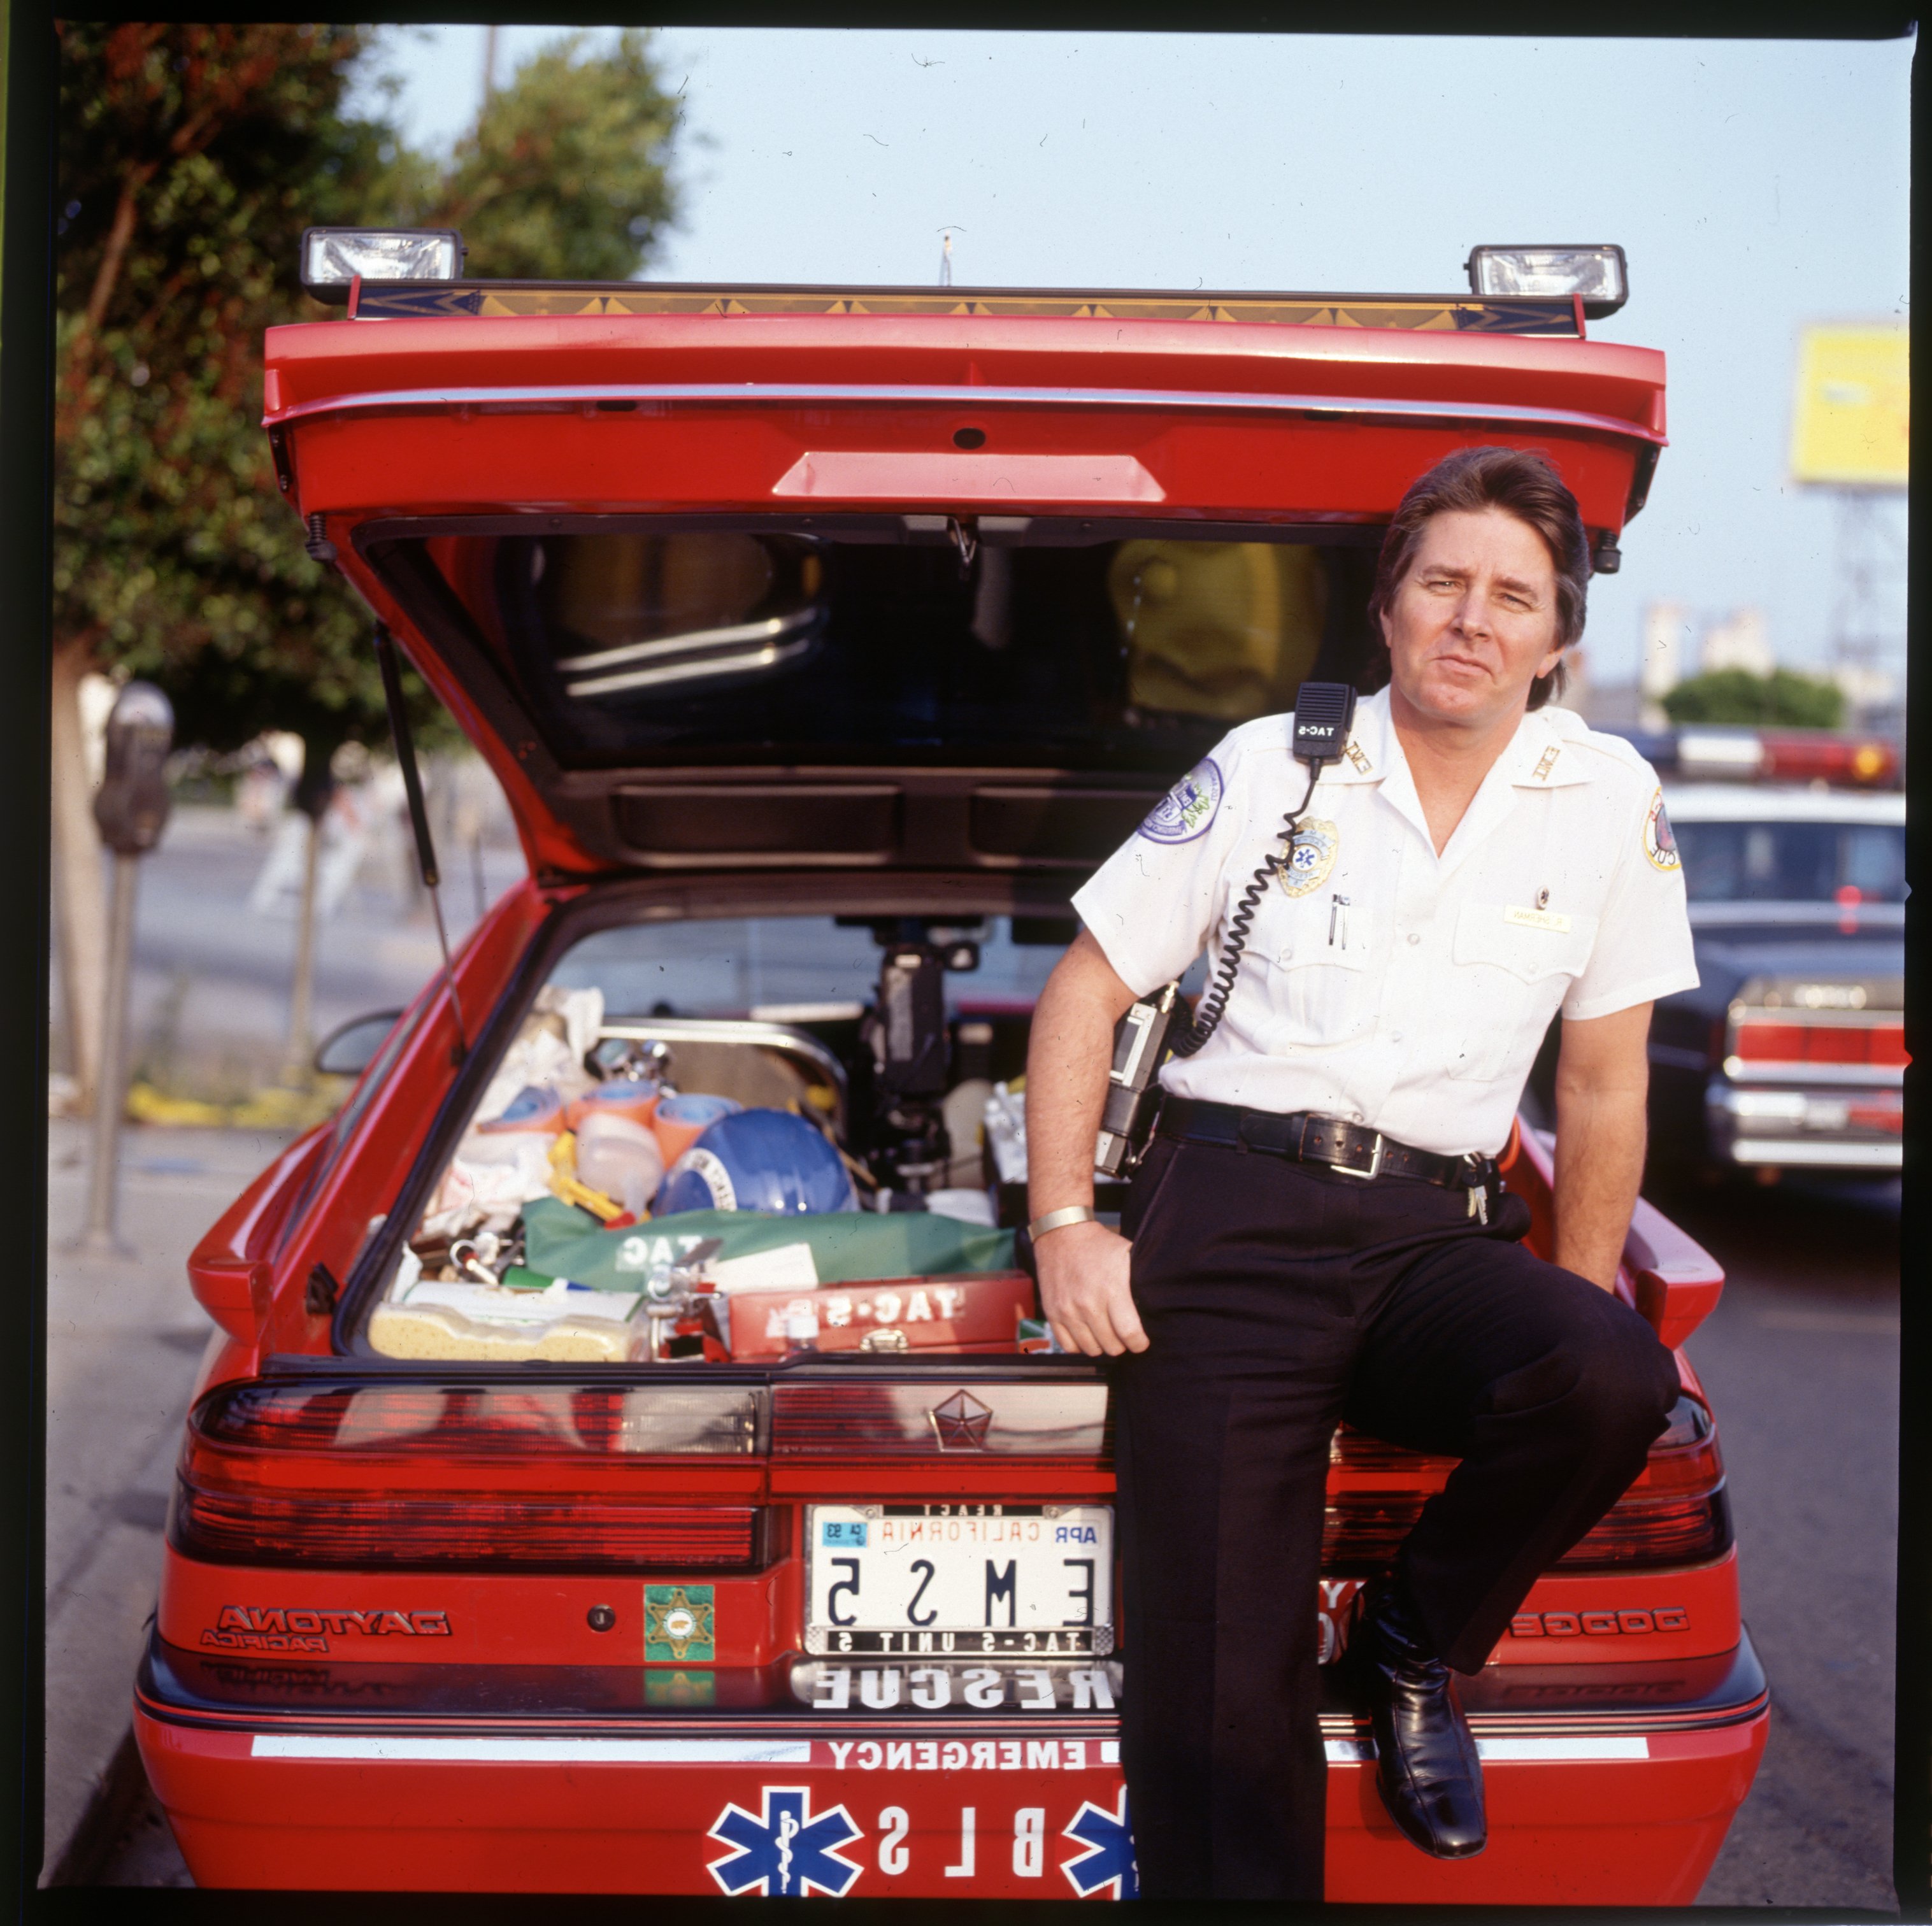 Bobby Sherman dressed as a paramedic, posing near an emergency vehicle. / Source: Getty Images